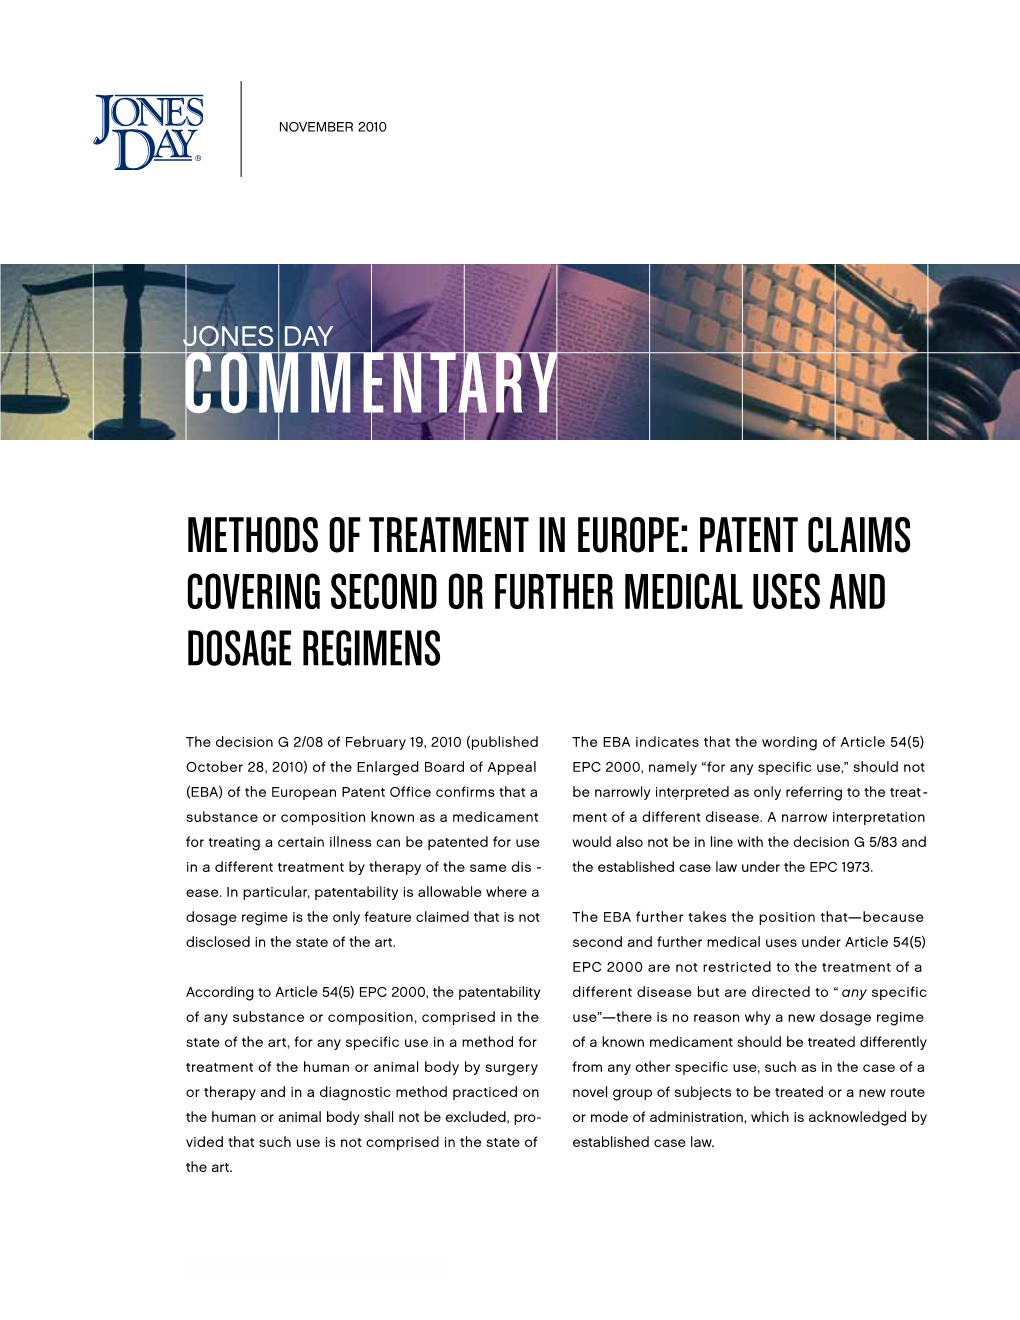 Methods of Treatment in Europe: Patent Claims Covering Second Or Further Medical Uses and Dosage Regimens